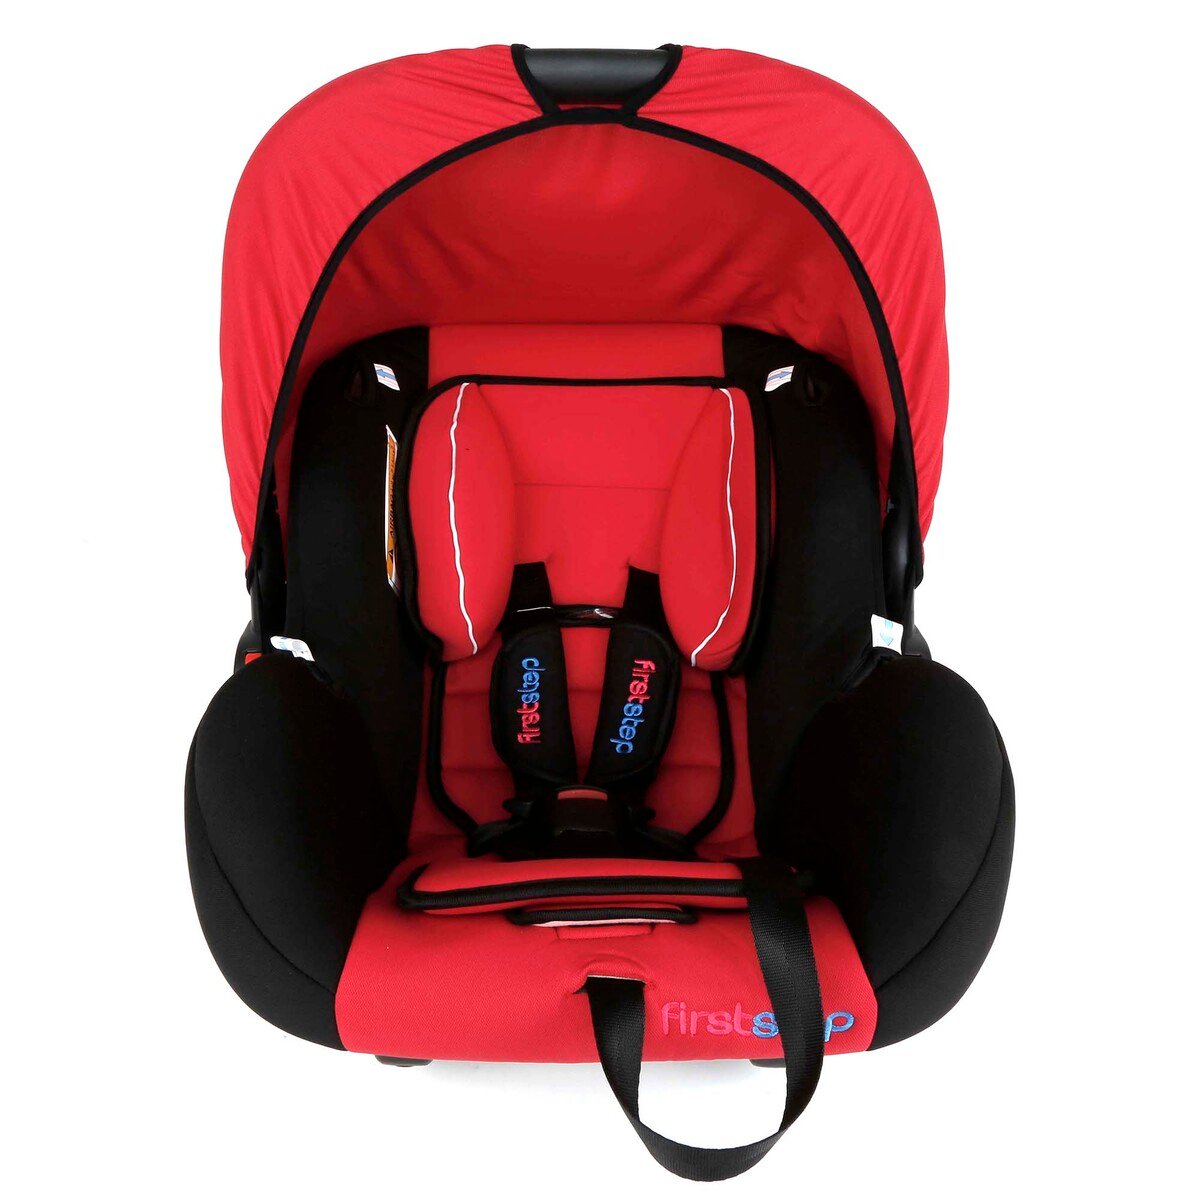 FirstStep First Step Baby Carry Cot RA-A Red-Black